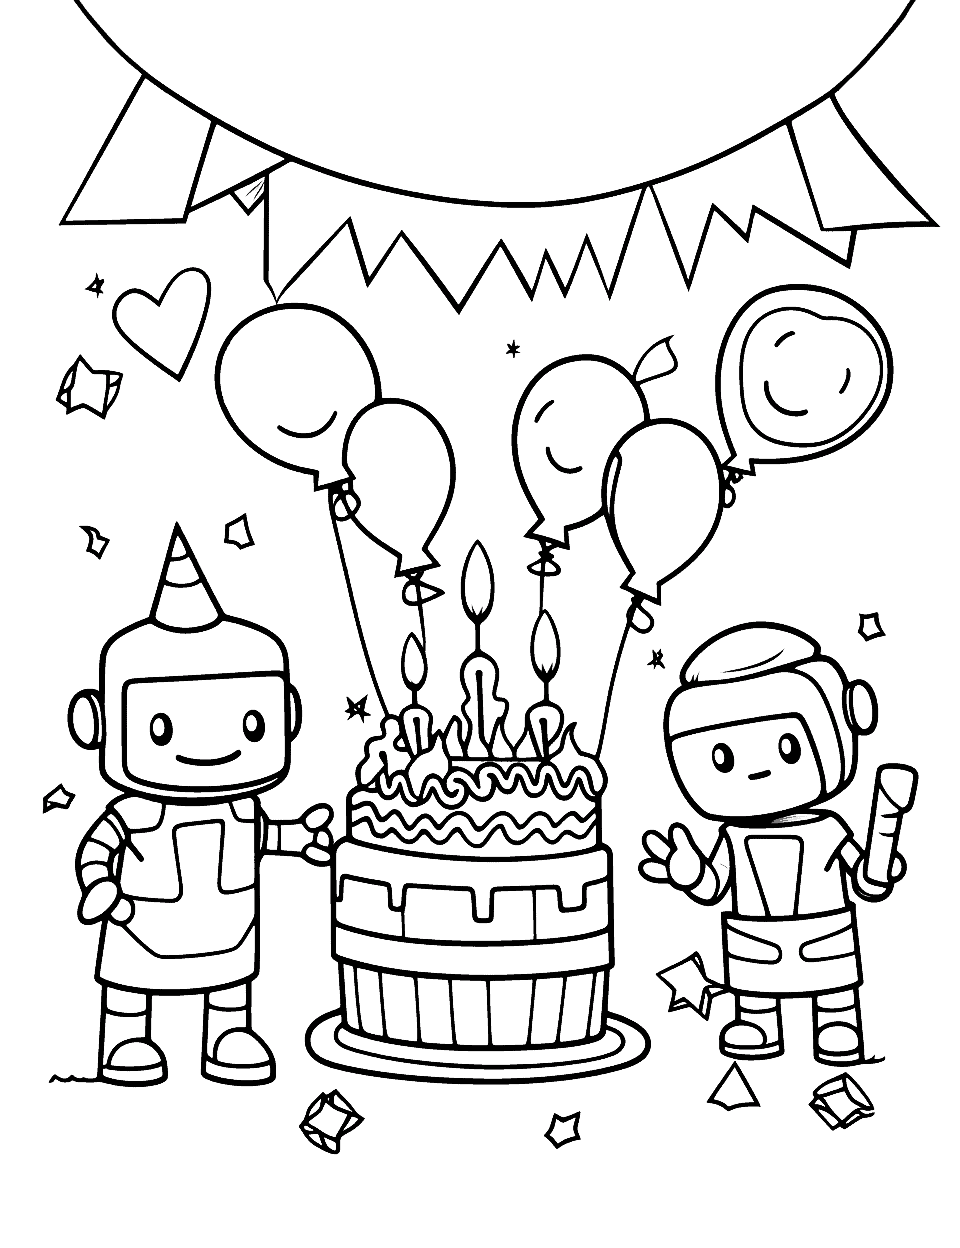 Robot's Futuristic Birthday Happy Coloring Page - A friendly robot enjoying a futuristic birthday party with his robot friend.